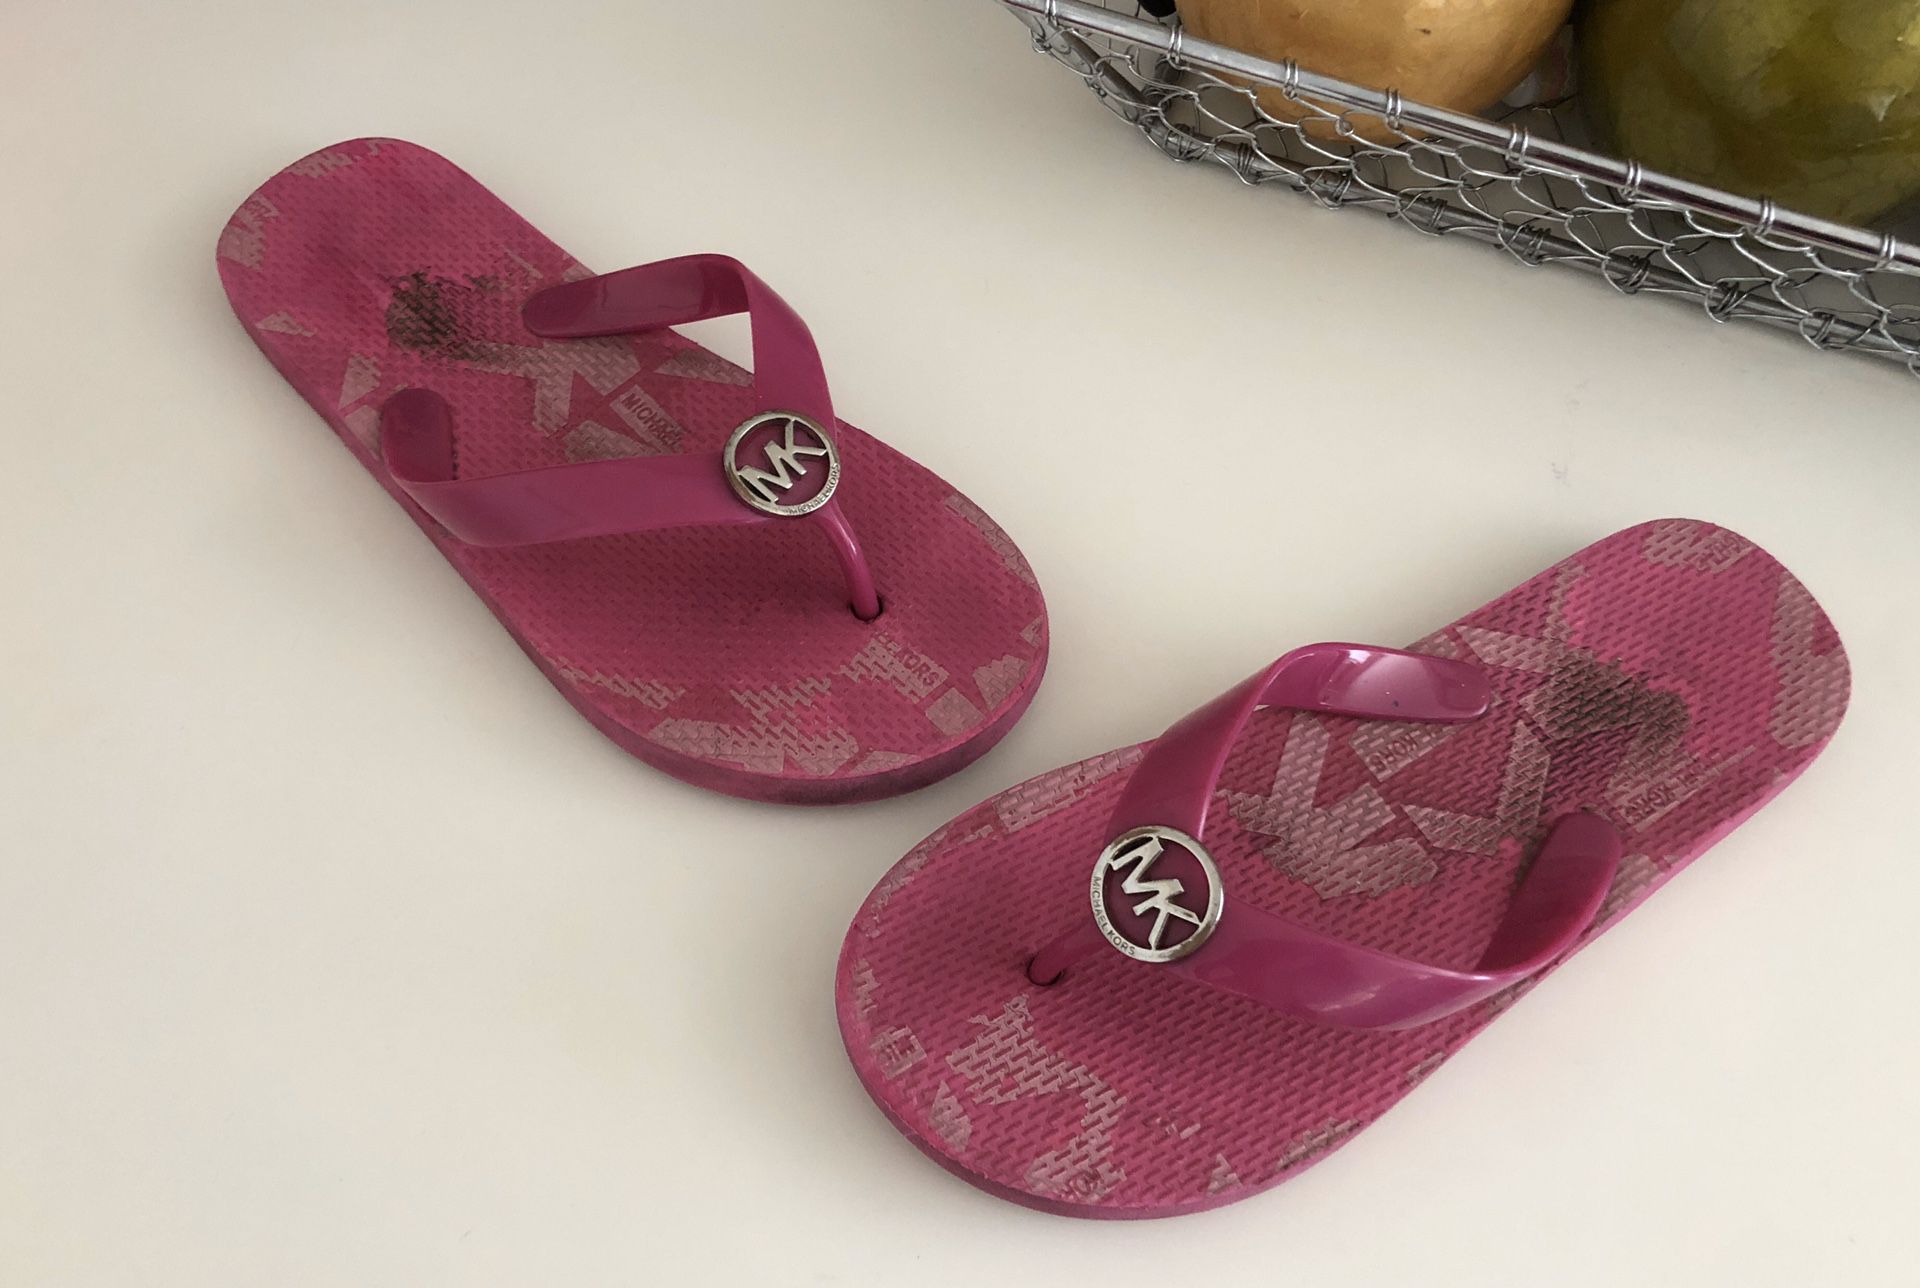 Authentic Michael Kors girls flip-flops sandals with silver metal logo size 2/3 use with lots of life